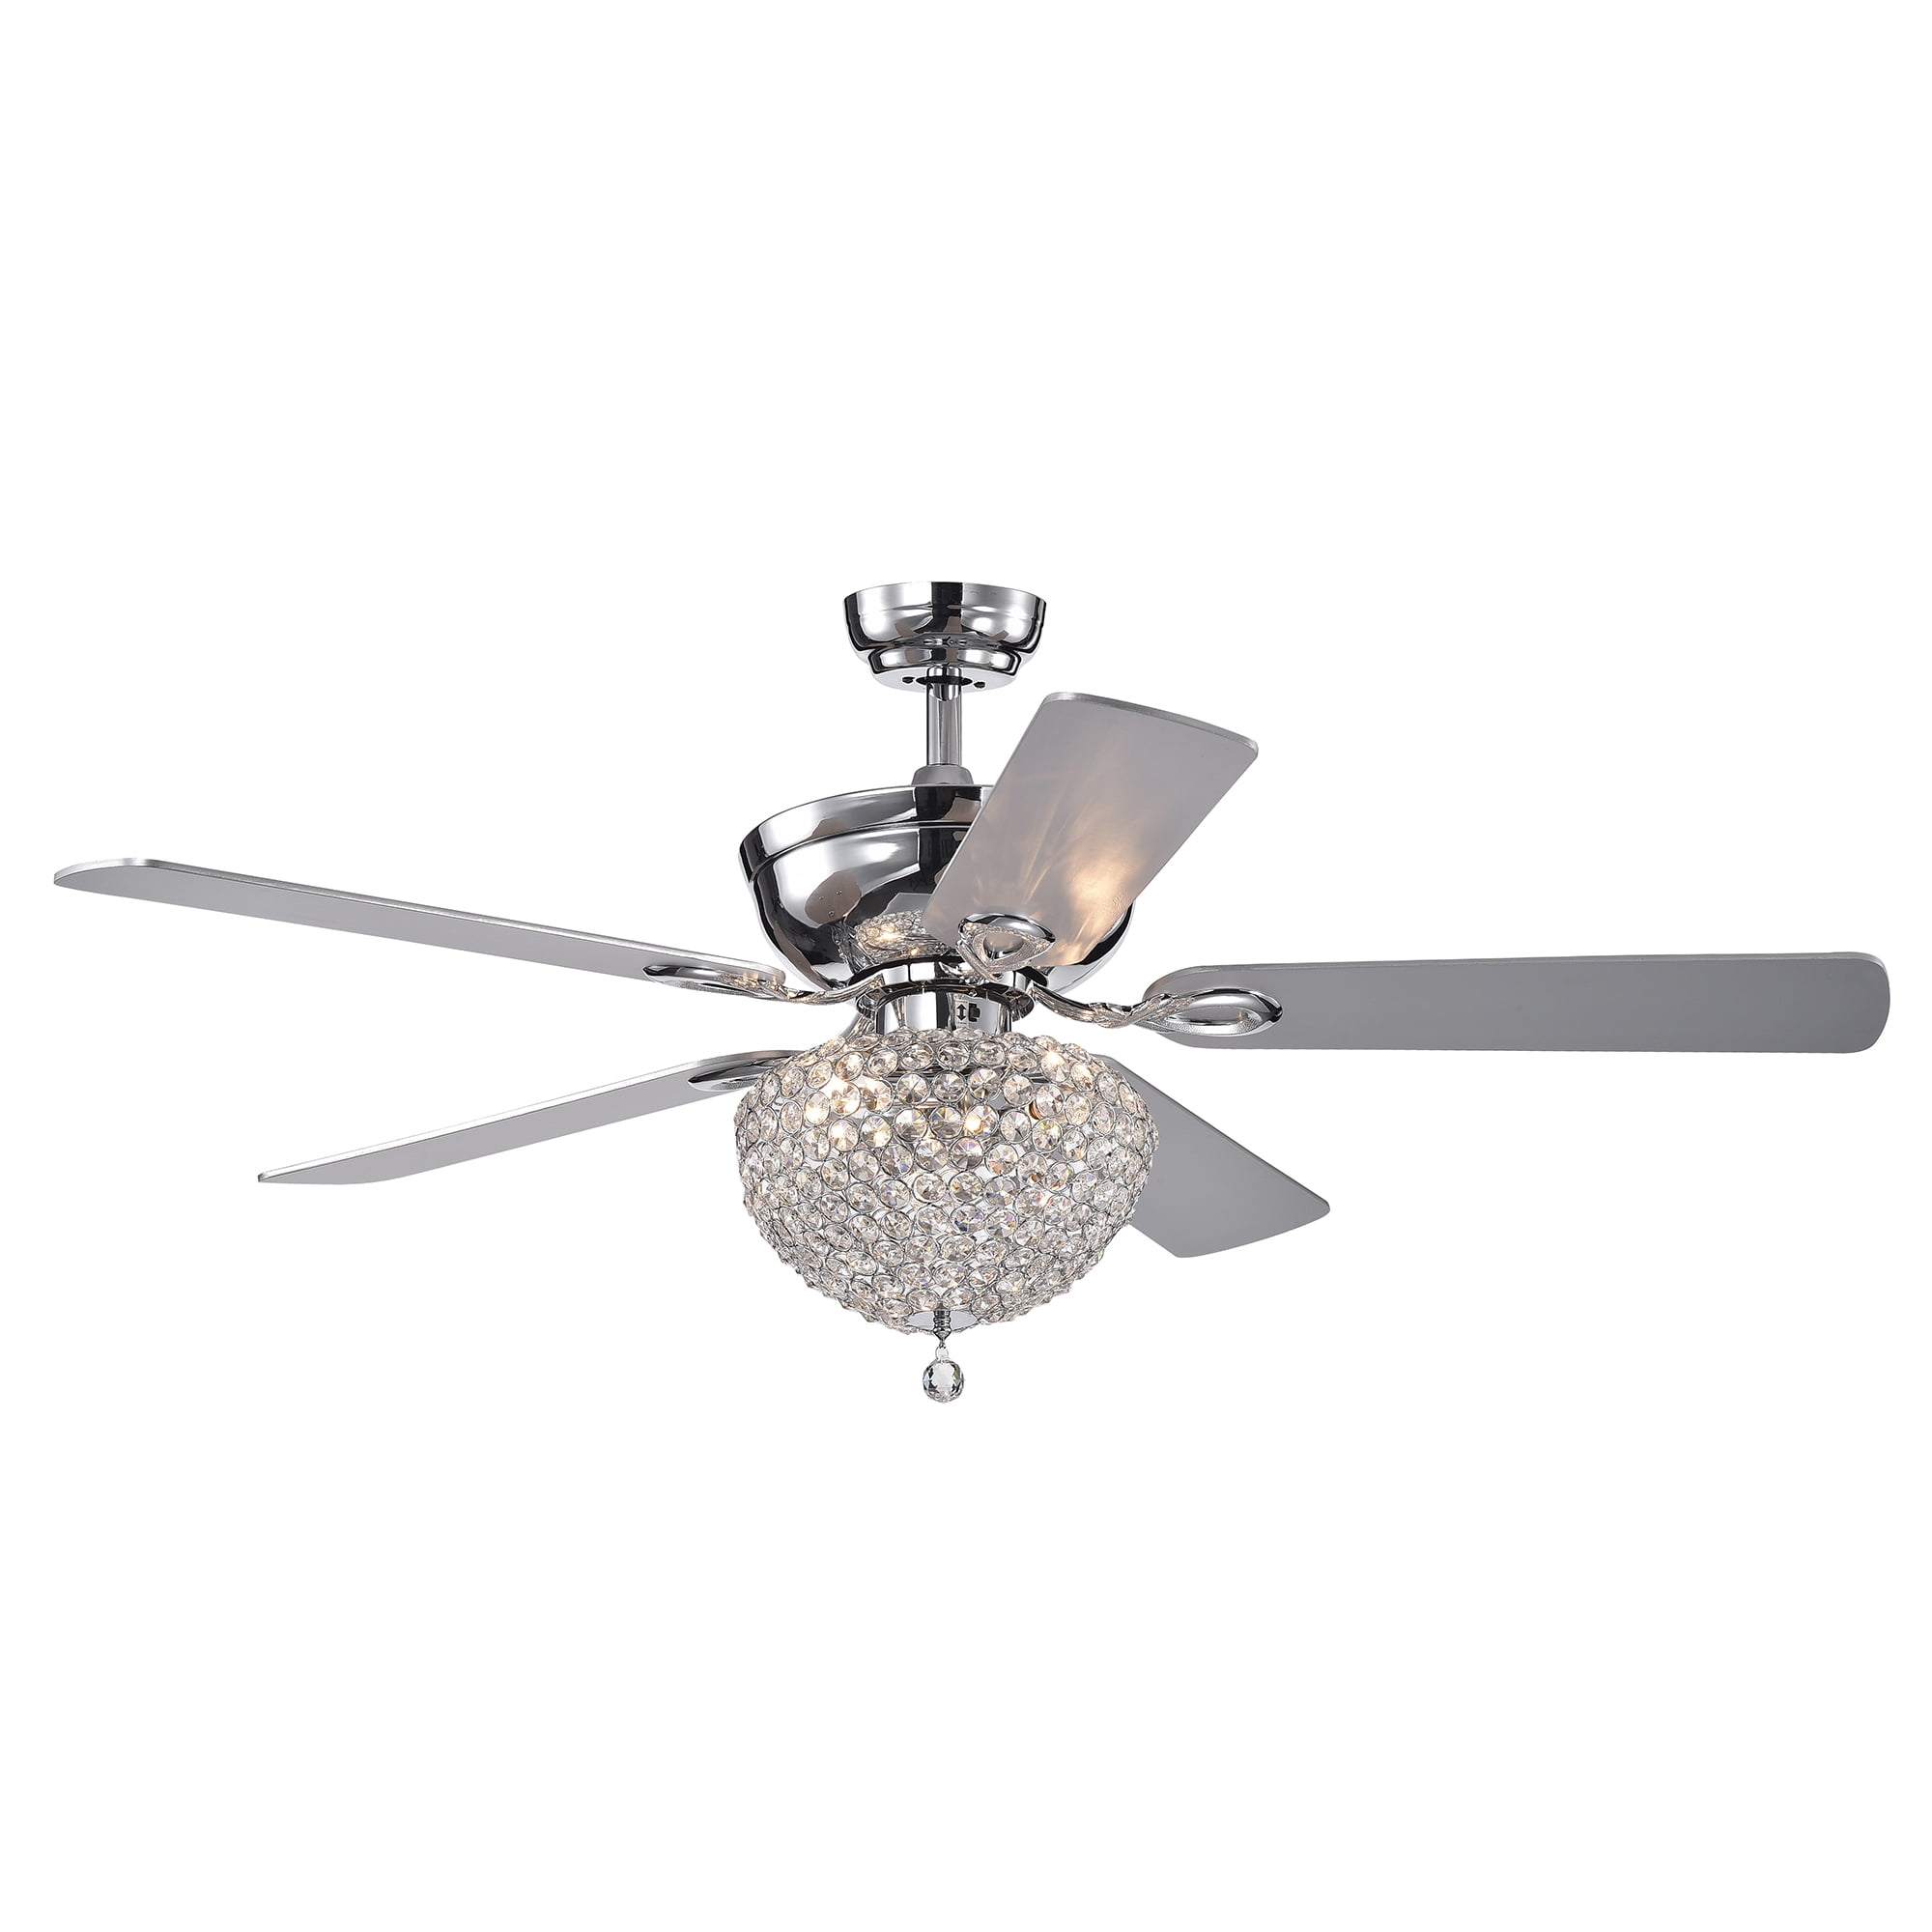 Swarna Chrome 5 Blade 52 Inch Lighted Ceiling Fan With Crystal